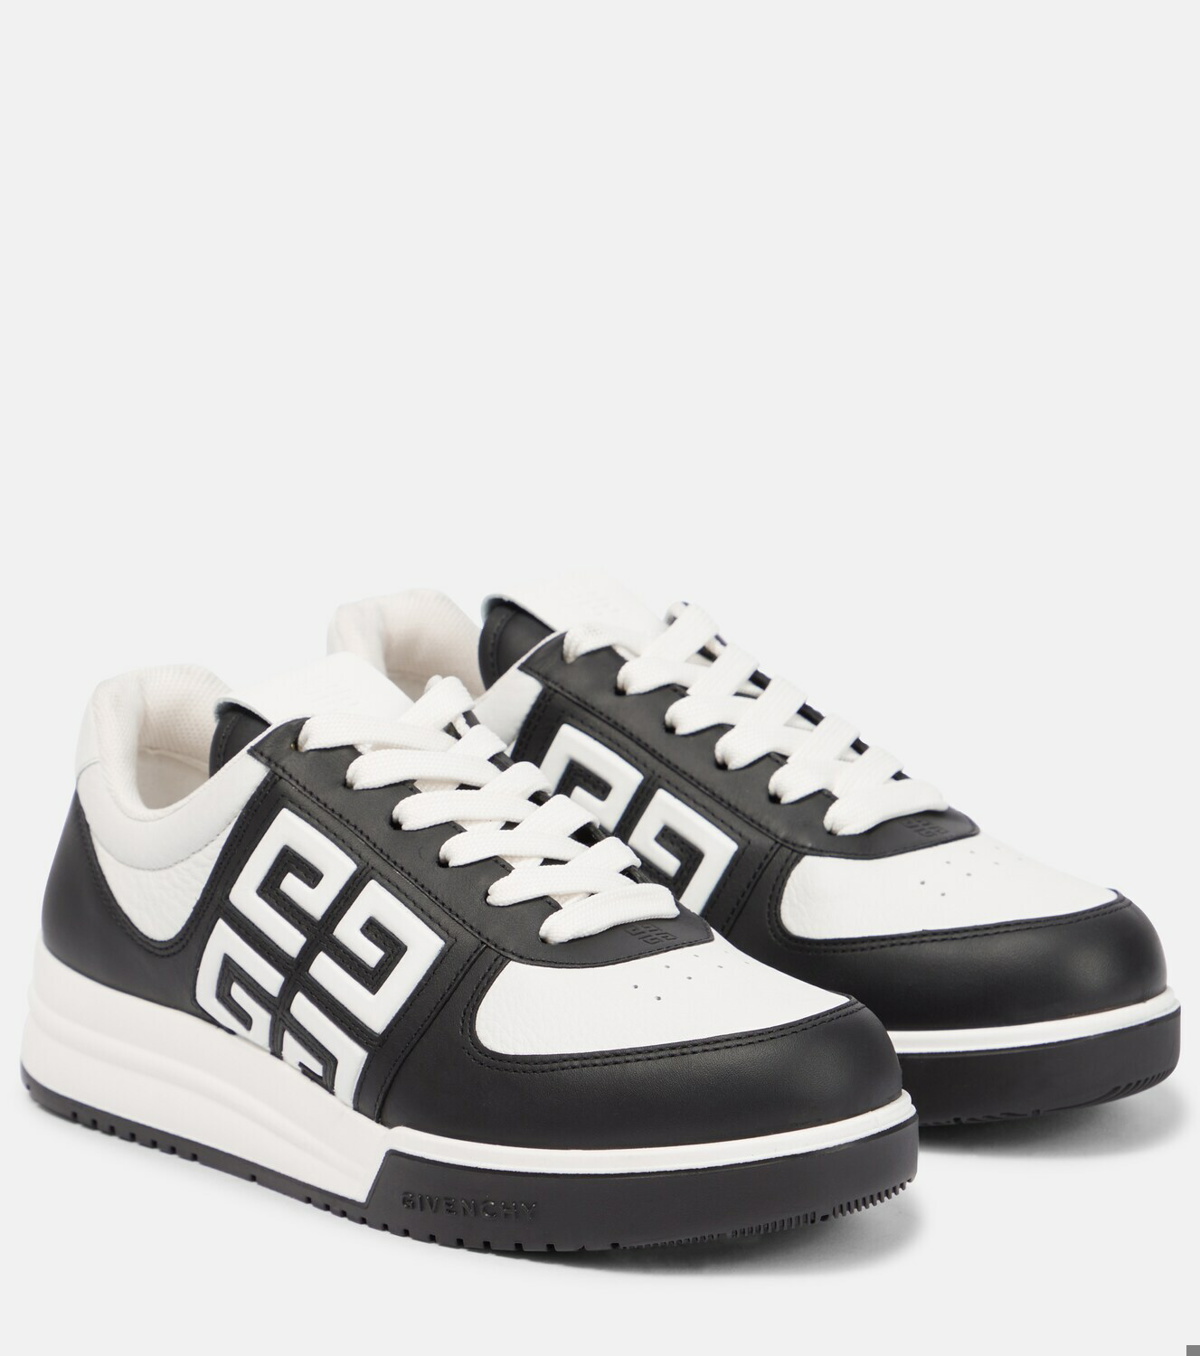 Givenchy - G4 leather low-top sneakers Givenchy